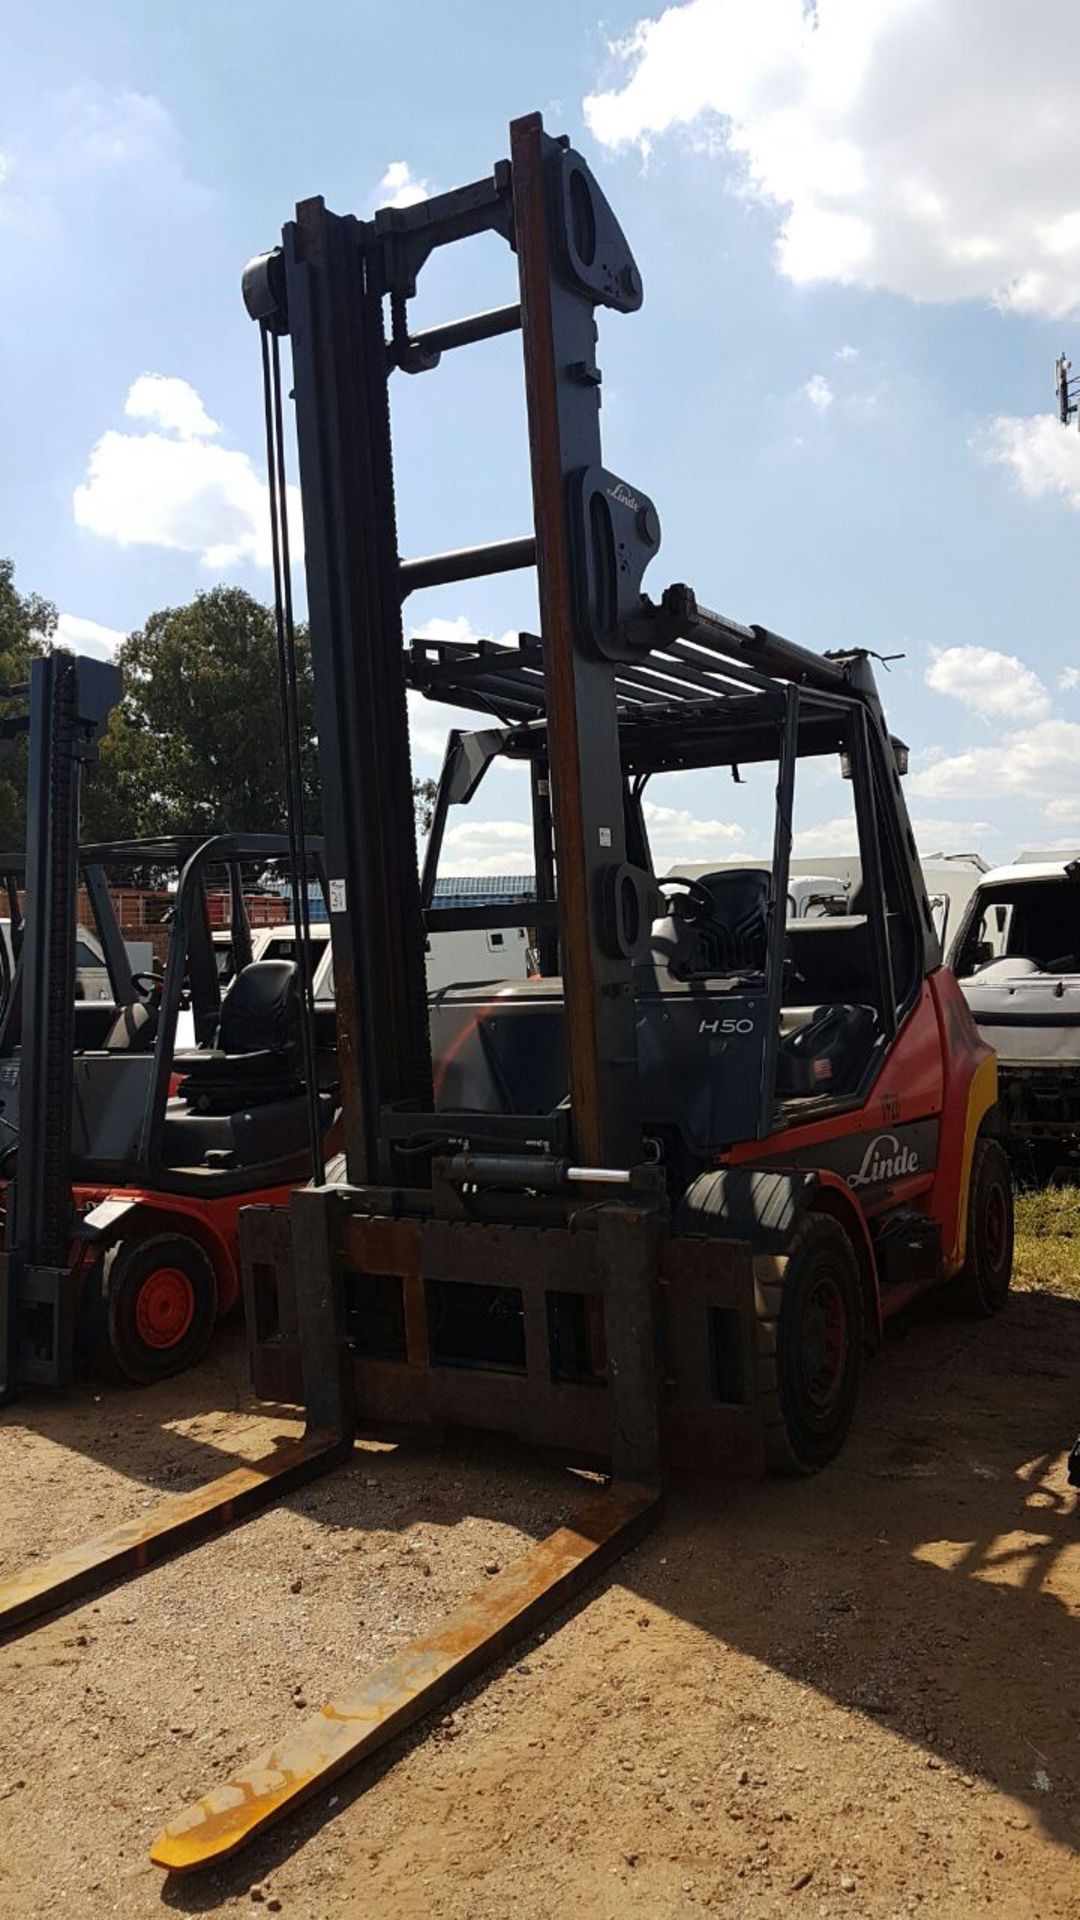 2011 LINDE H50D 5 TON DIESEL FORKLIFT (17,288 HOURS - HOURS NOT GUARANTEED BY AUCTIONEER) - (JHB) - Image 3 of 3